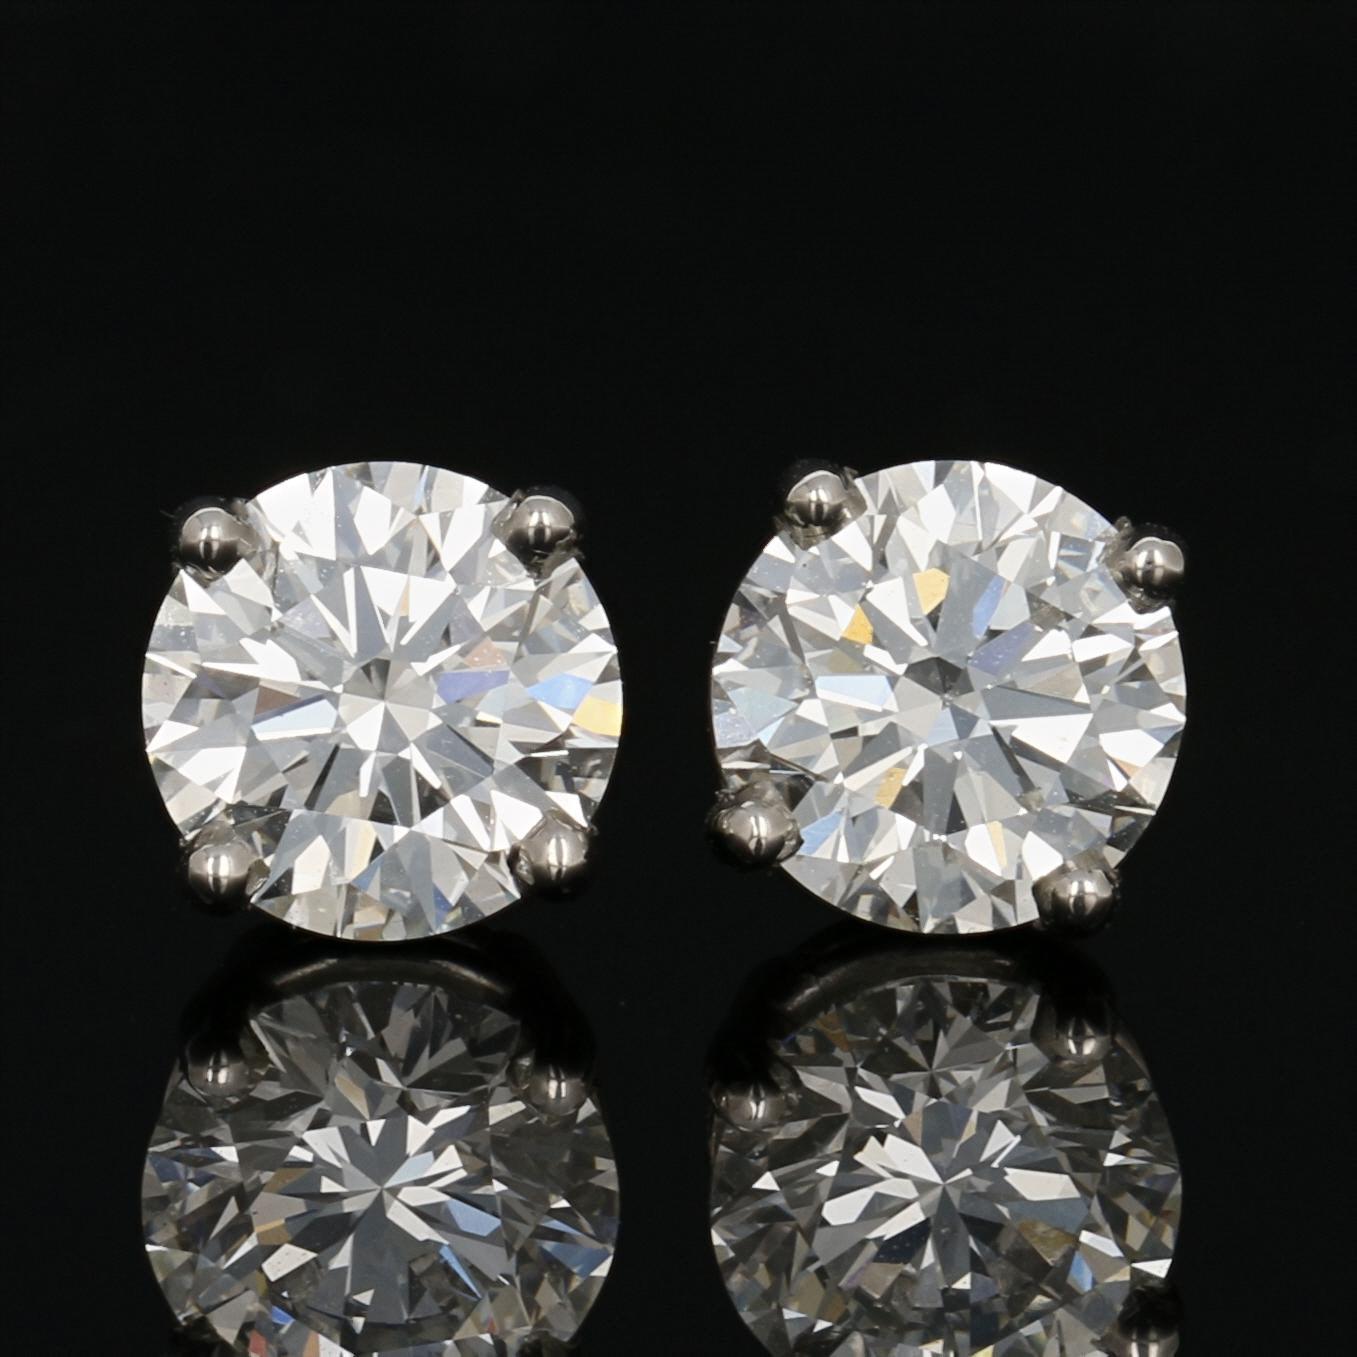 With the gift of diamonds, you can say it all without saying a word! Crafted in 950 platinum, these luxurious NEW stud earrings feature GIA-graded natural diamonds held in four-prong basket mounts to illuminate each gemstone’s spectacular